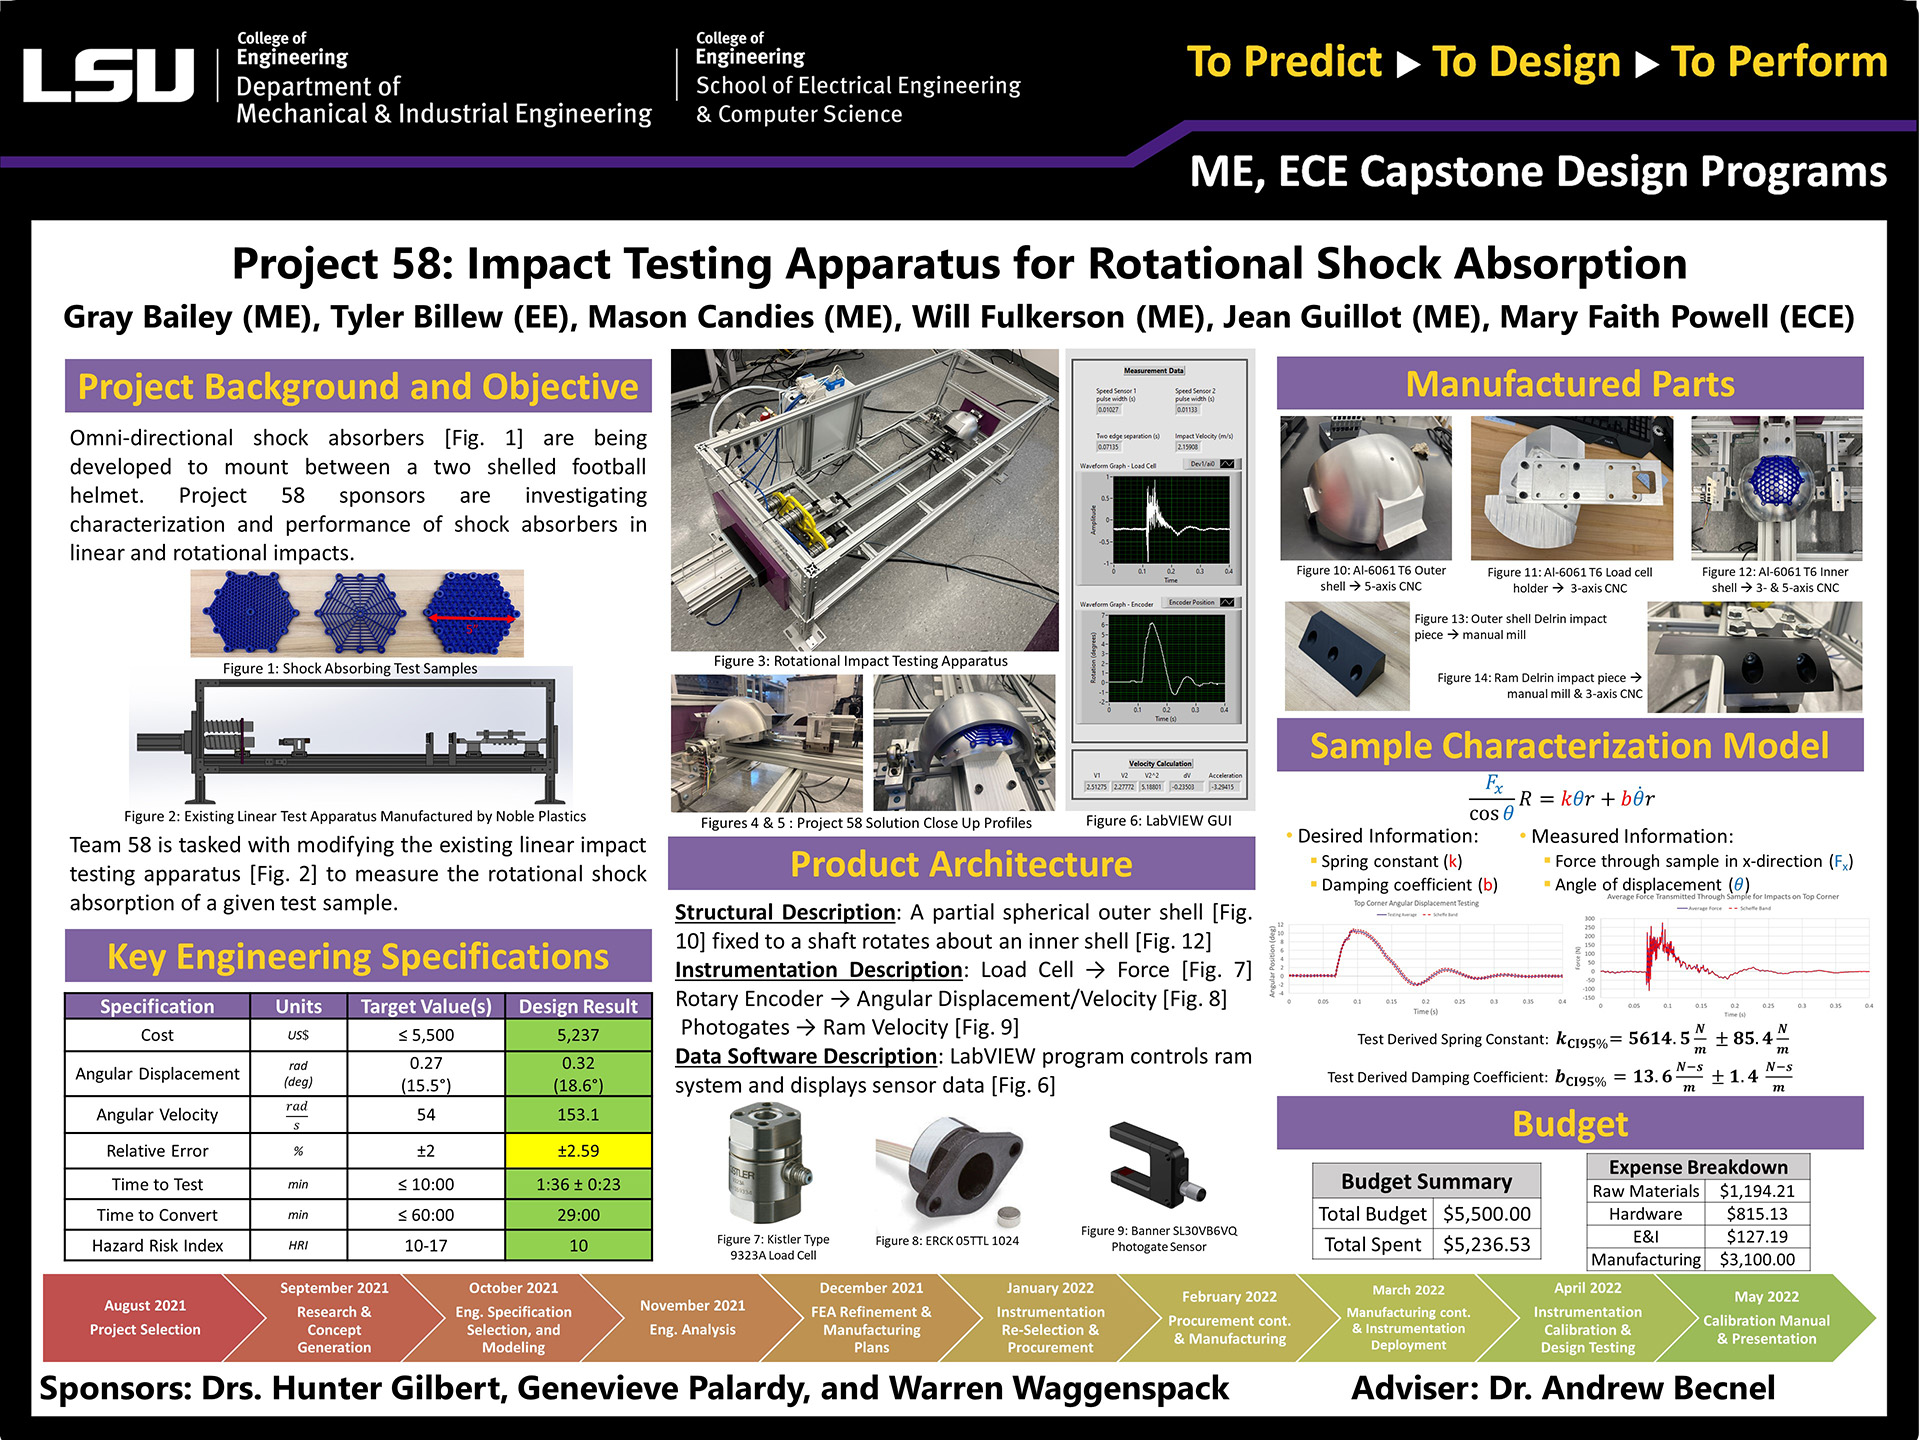 Project 58: Impact Testing Apparatus for Rotational Shock Absorption (2022)